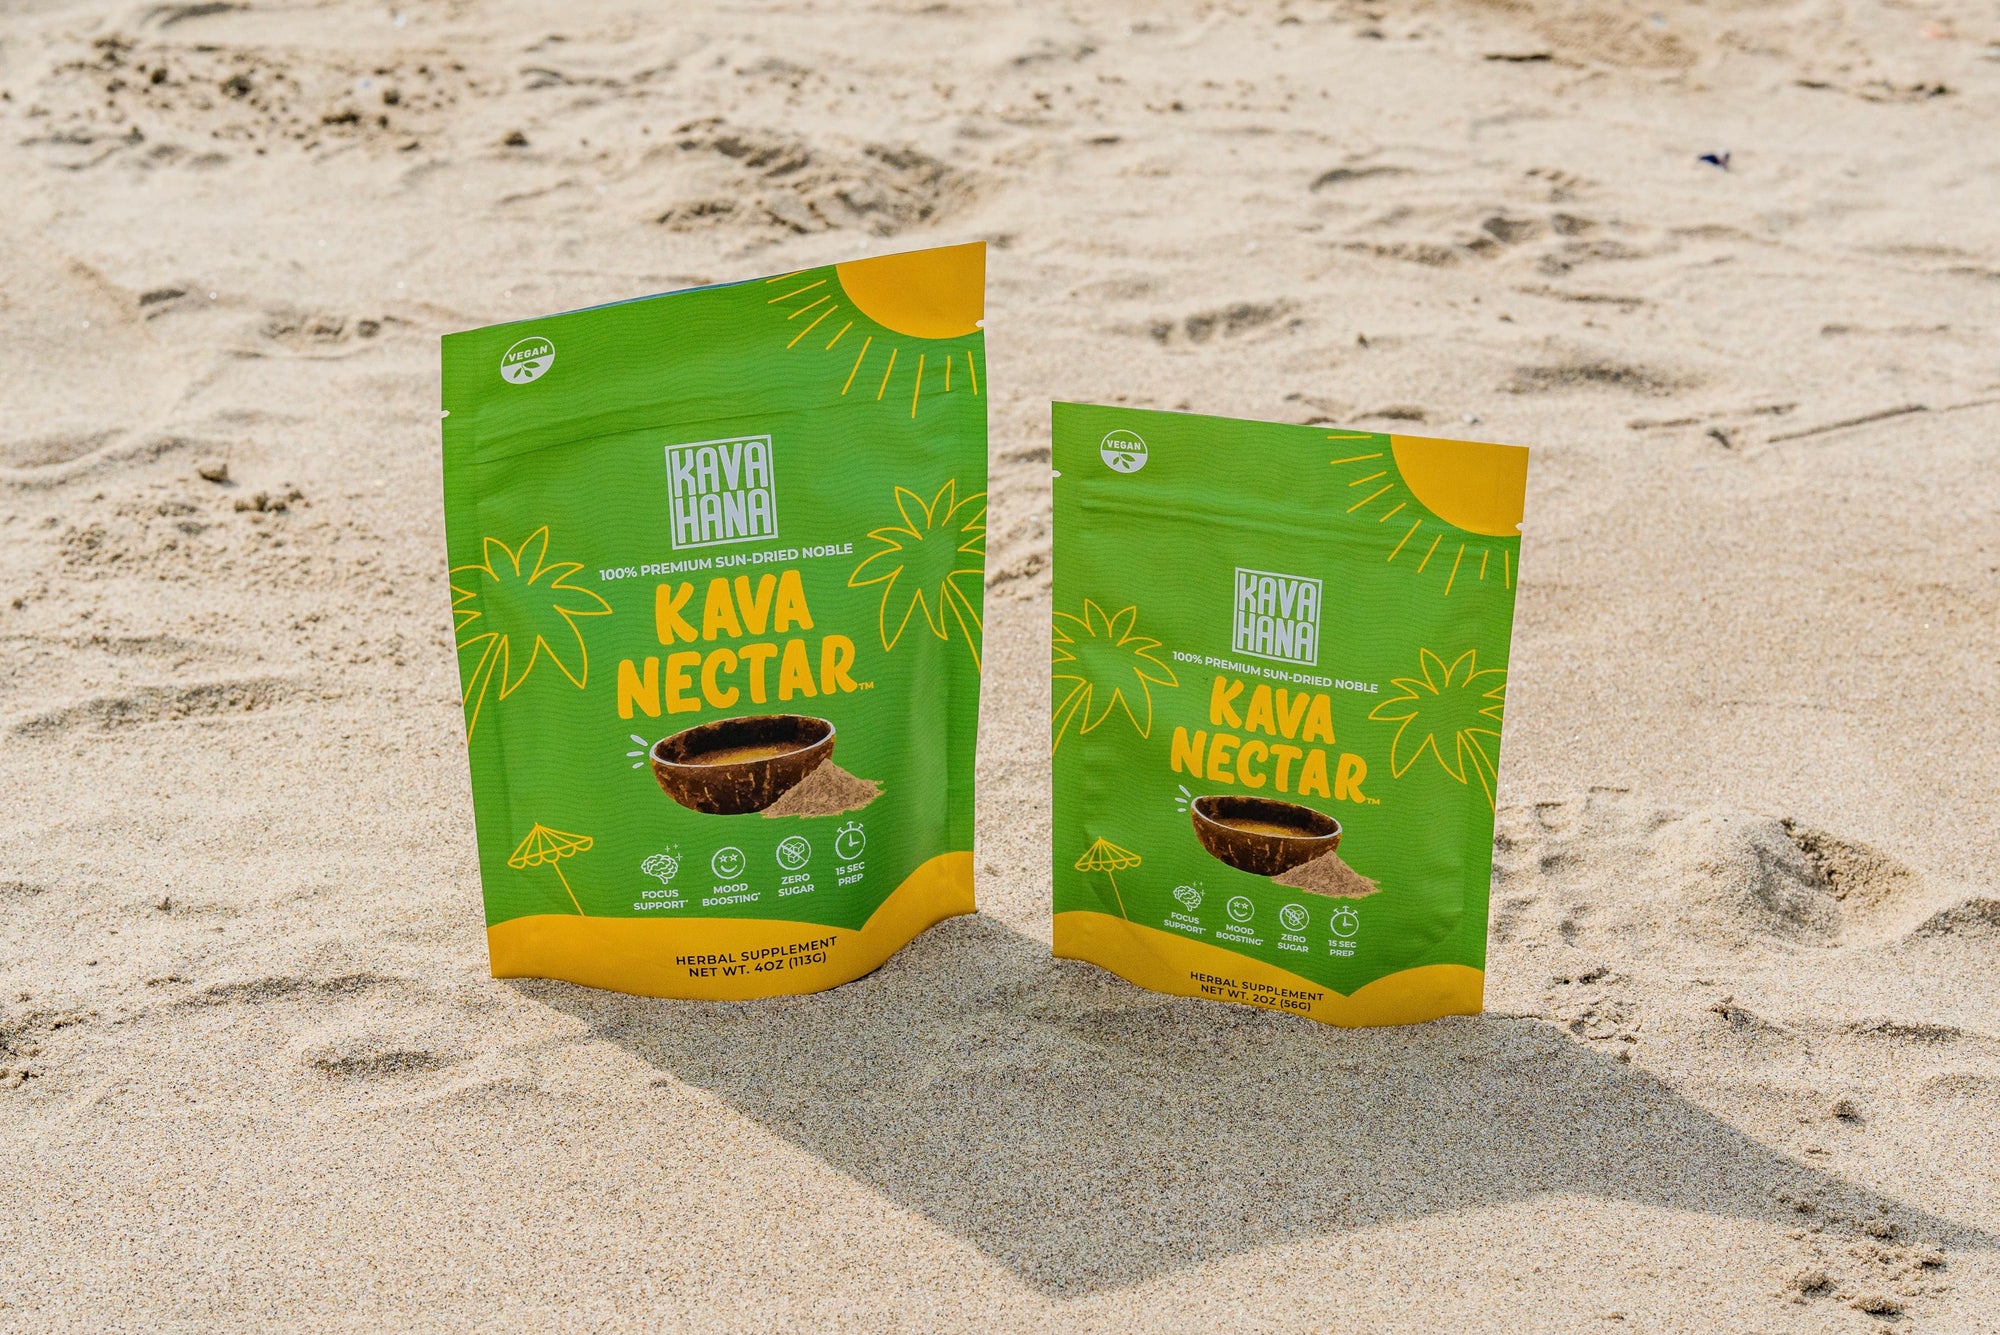 a photograph taken during daylight on the beach in santa monica california showing both sizes of kava nectar by kavahana in the sand.